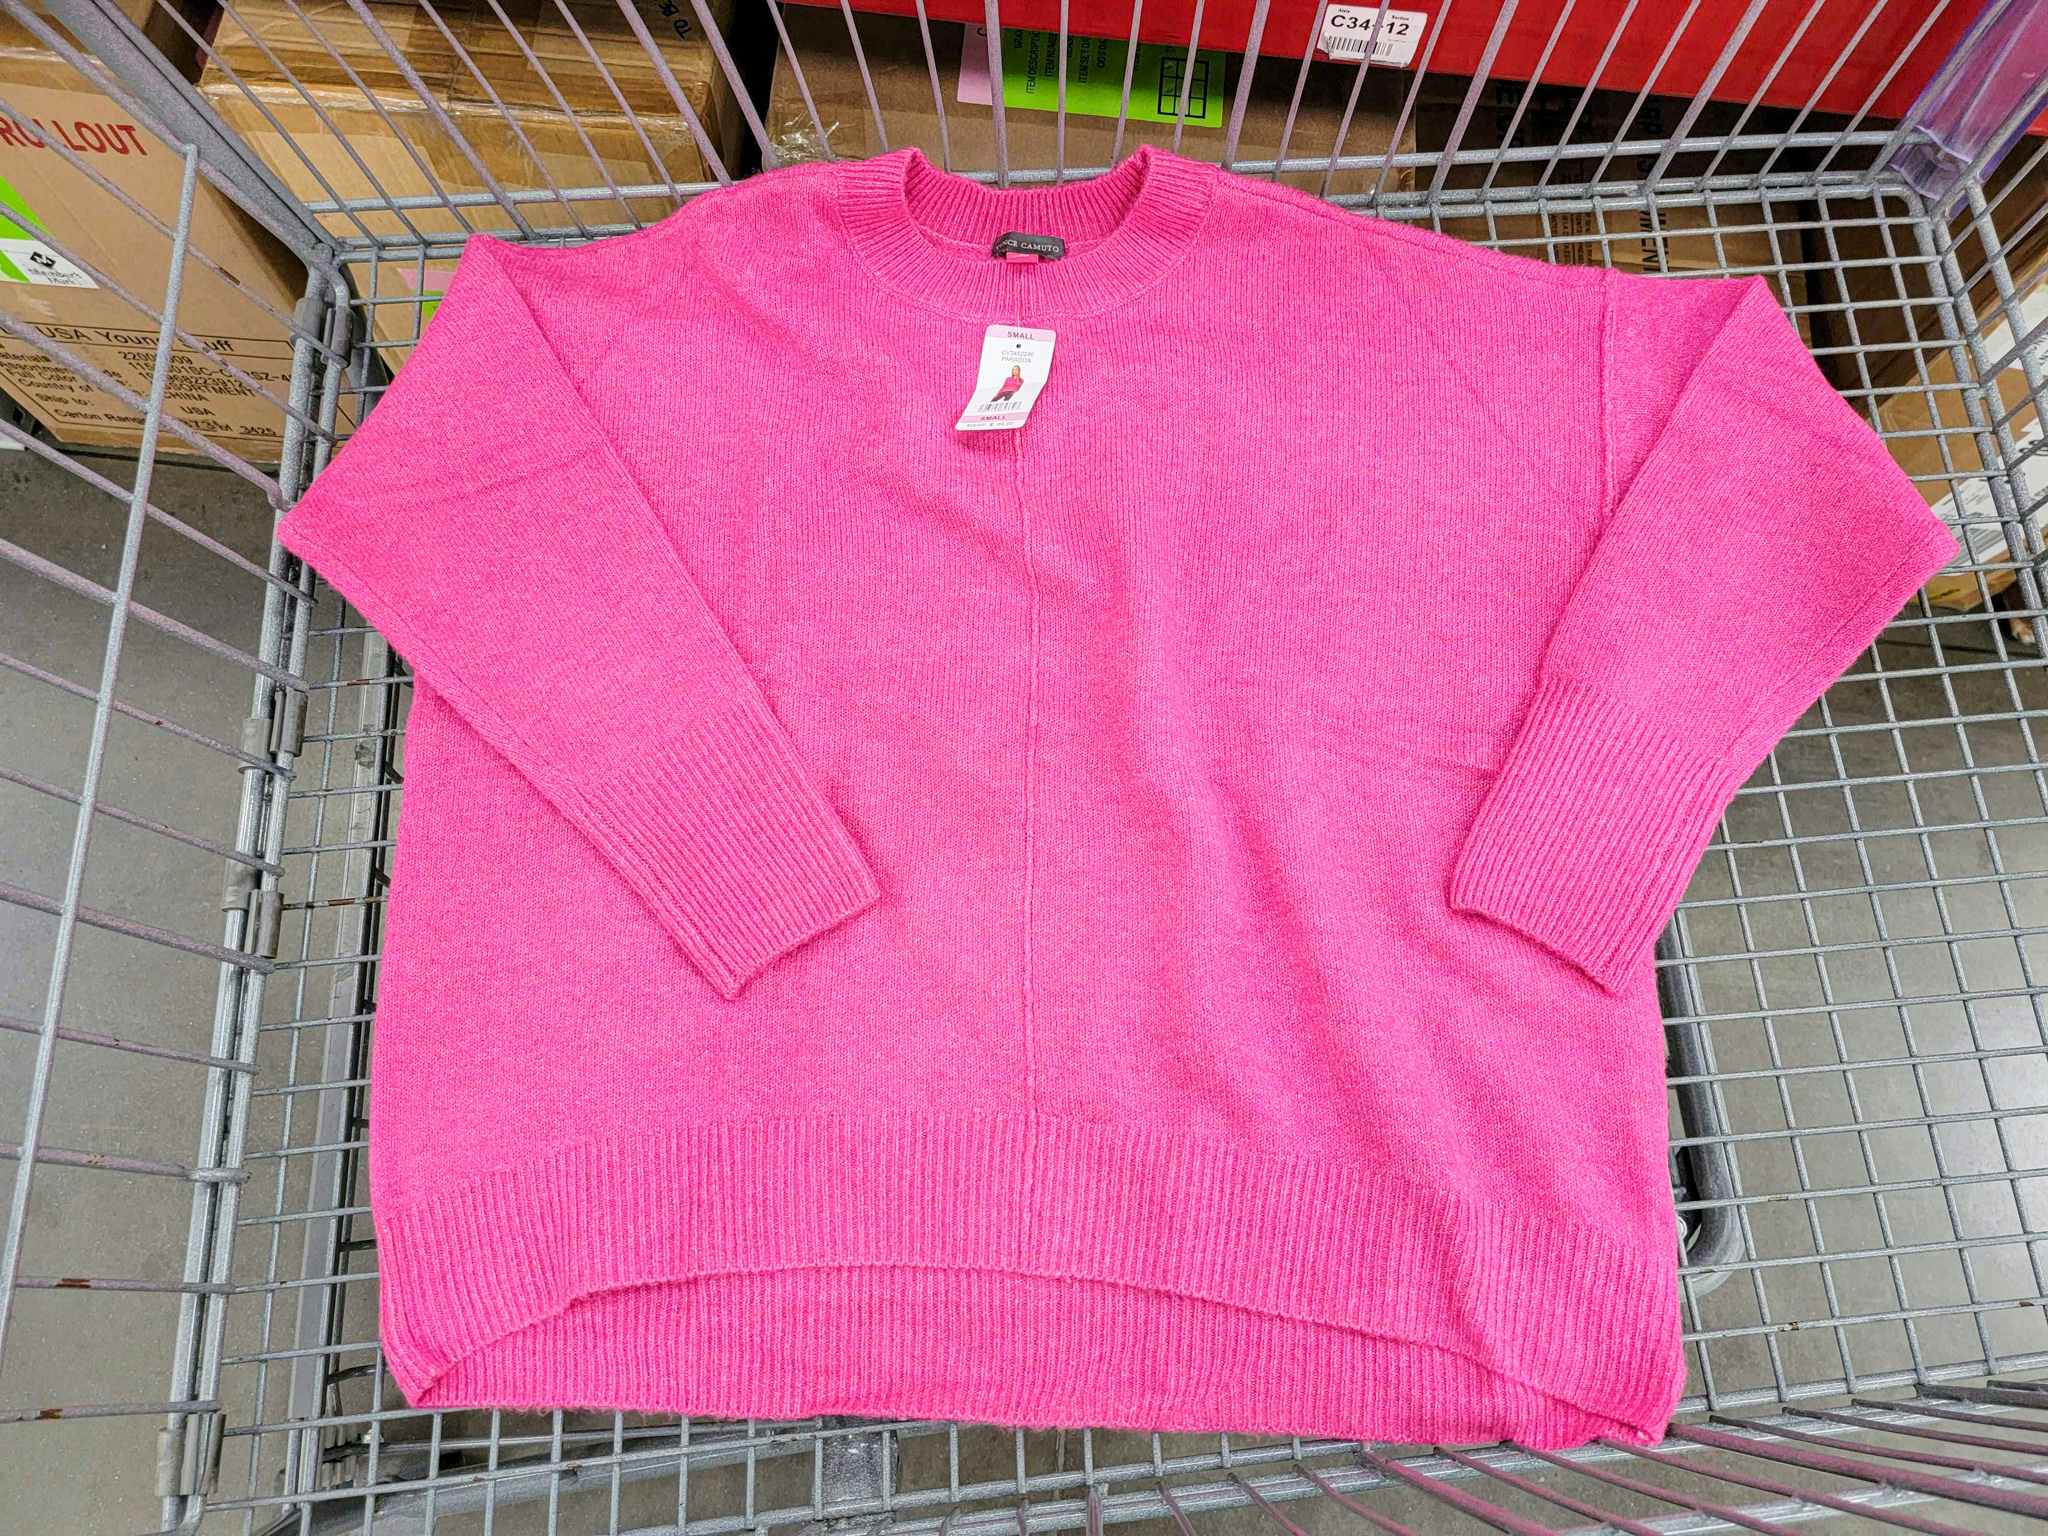 pink sweater in a cart